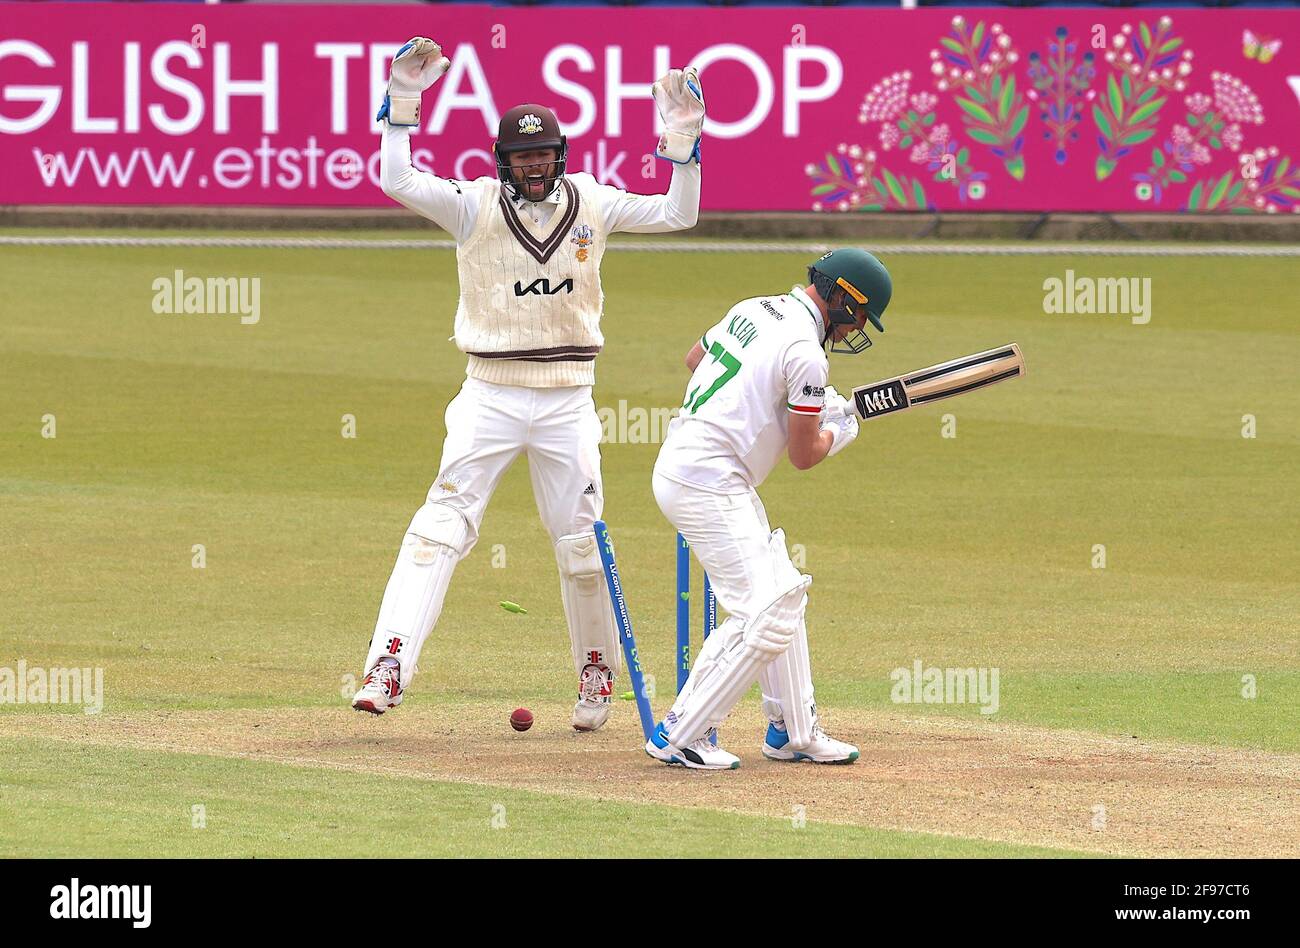 16 April, 2021. London, UK. Surrey’s Amar Virdi bowls Dieter Klein as Surrey take on Leicestershire in  the County Championship at the Kia Oval, day two. David Rowe/Alamy Live News Stock Photo